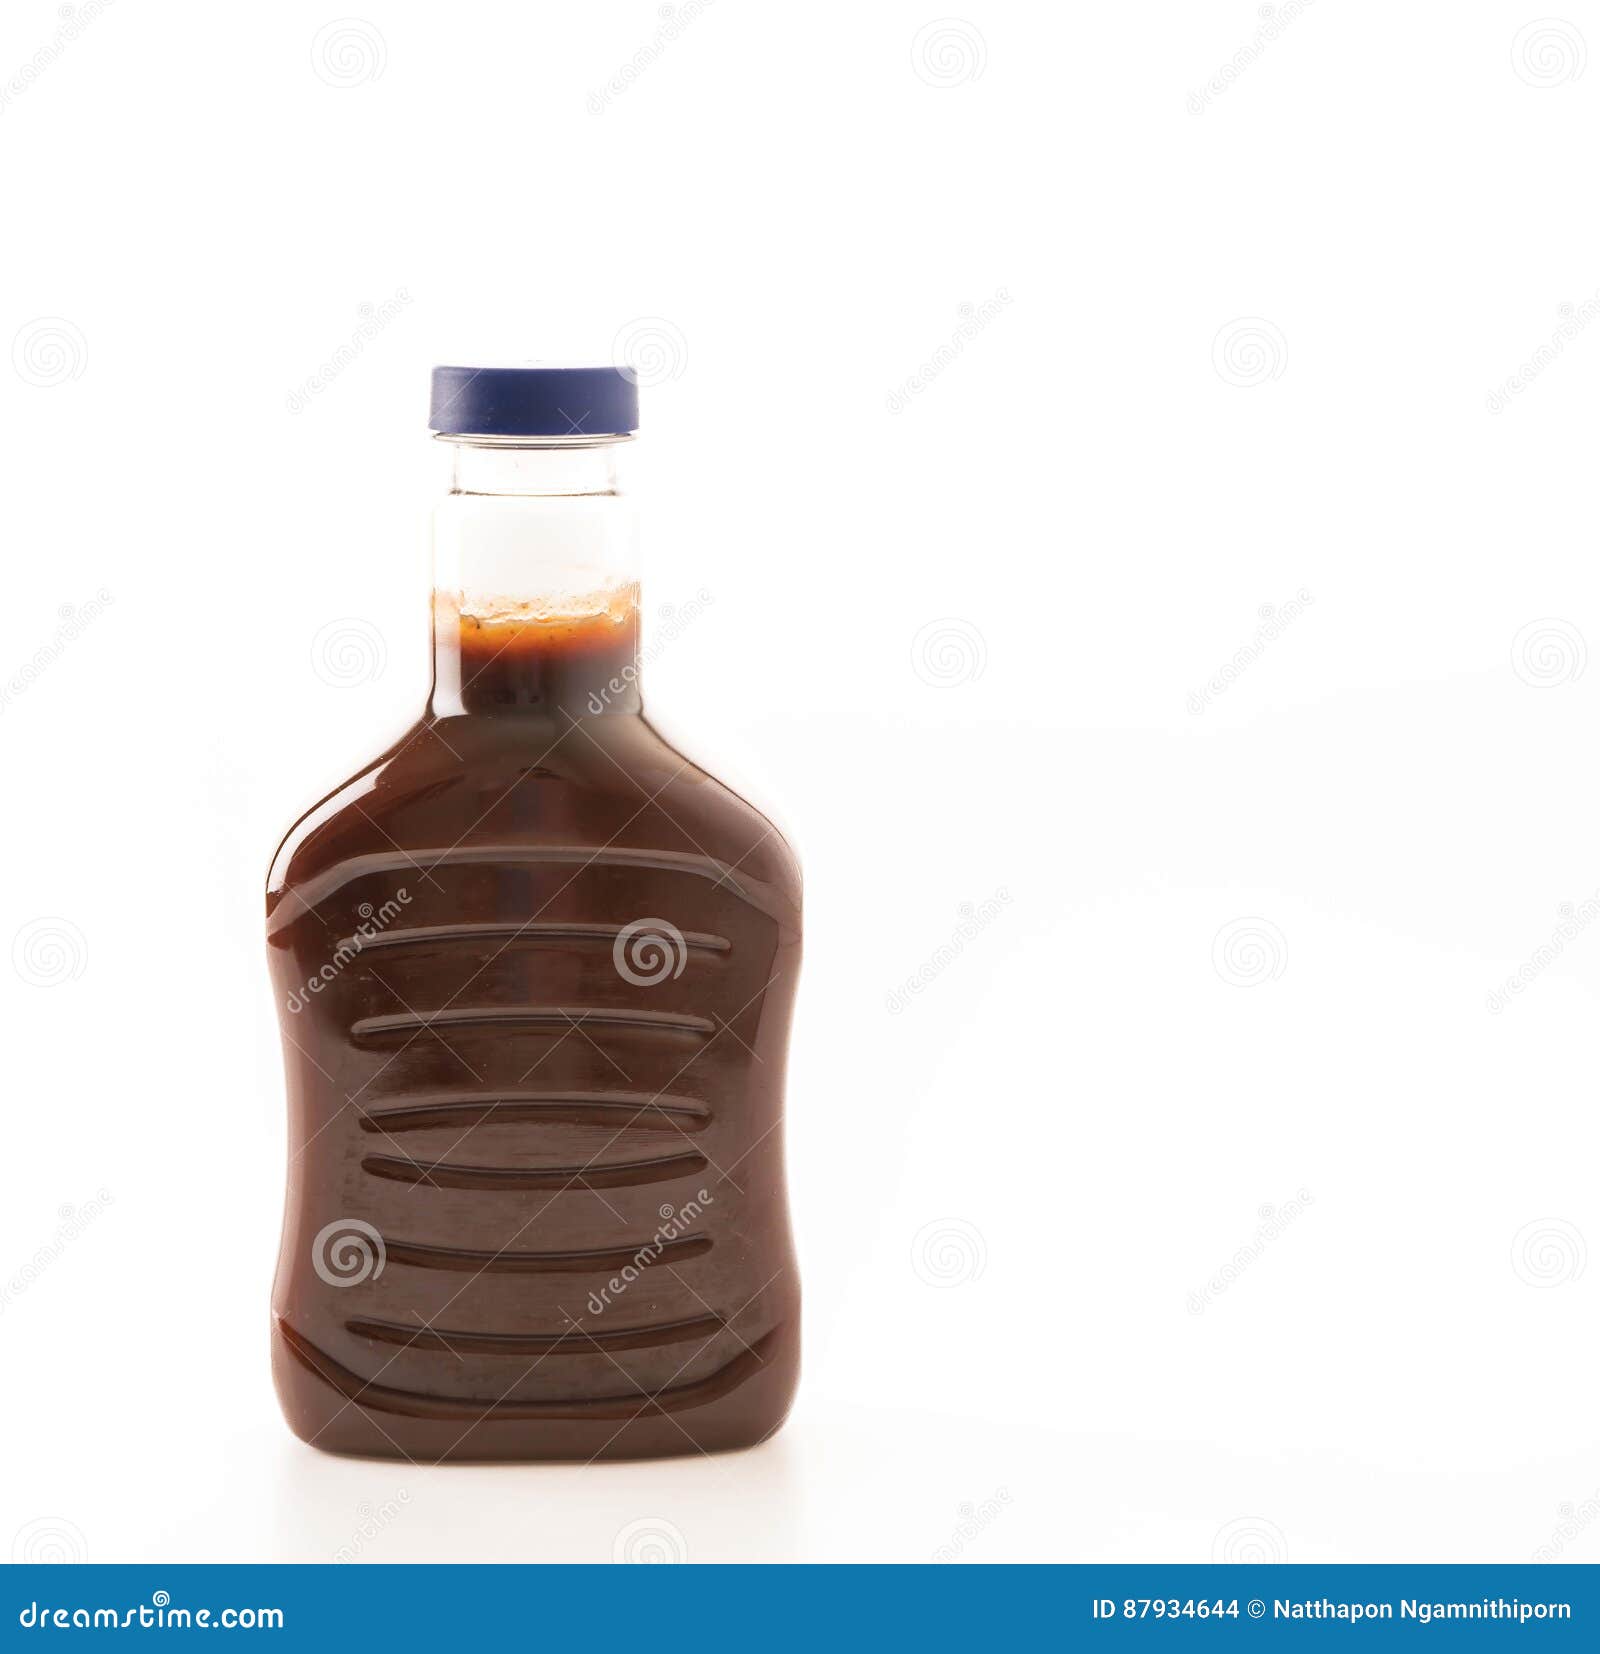 Download 1 434 Bbq Sauce Bottle Photos Free Royalty Free Stock Photos From Dreamstime Yellowimages Mockups